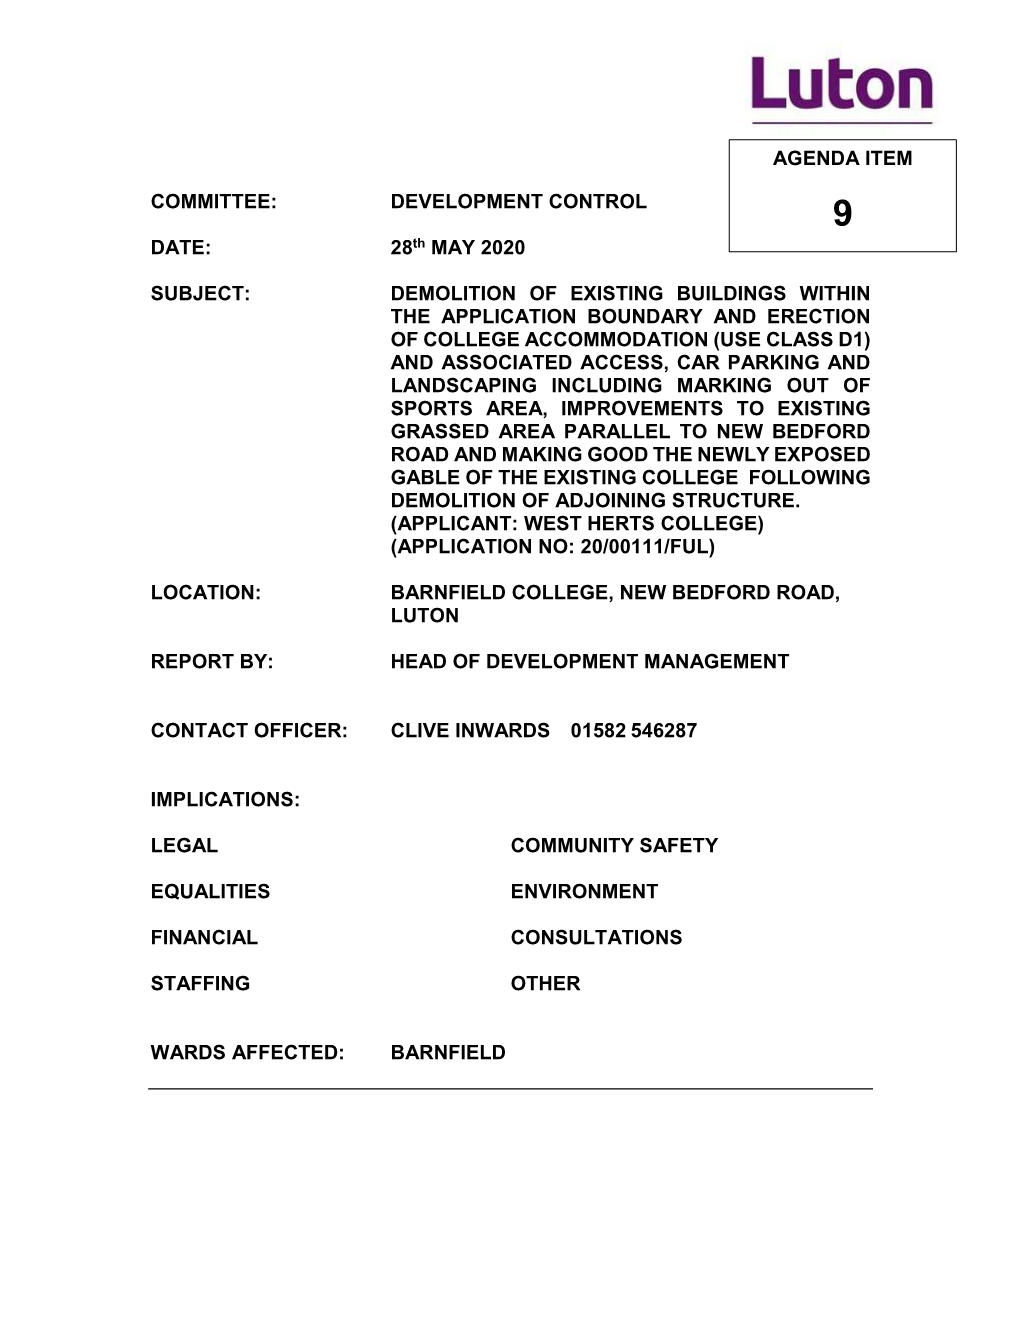 (Full Redevelopment Application), New Bedford Road, Luton